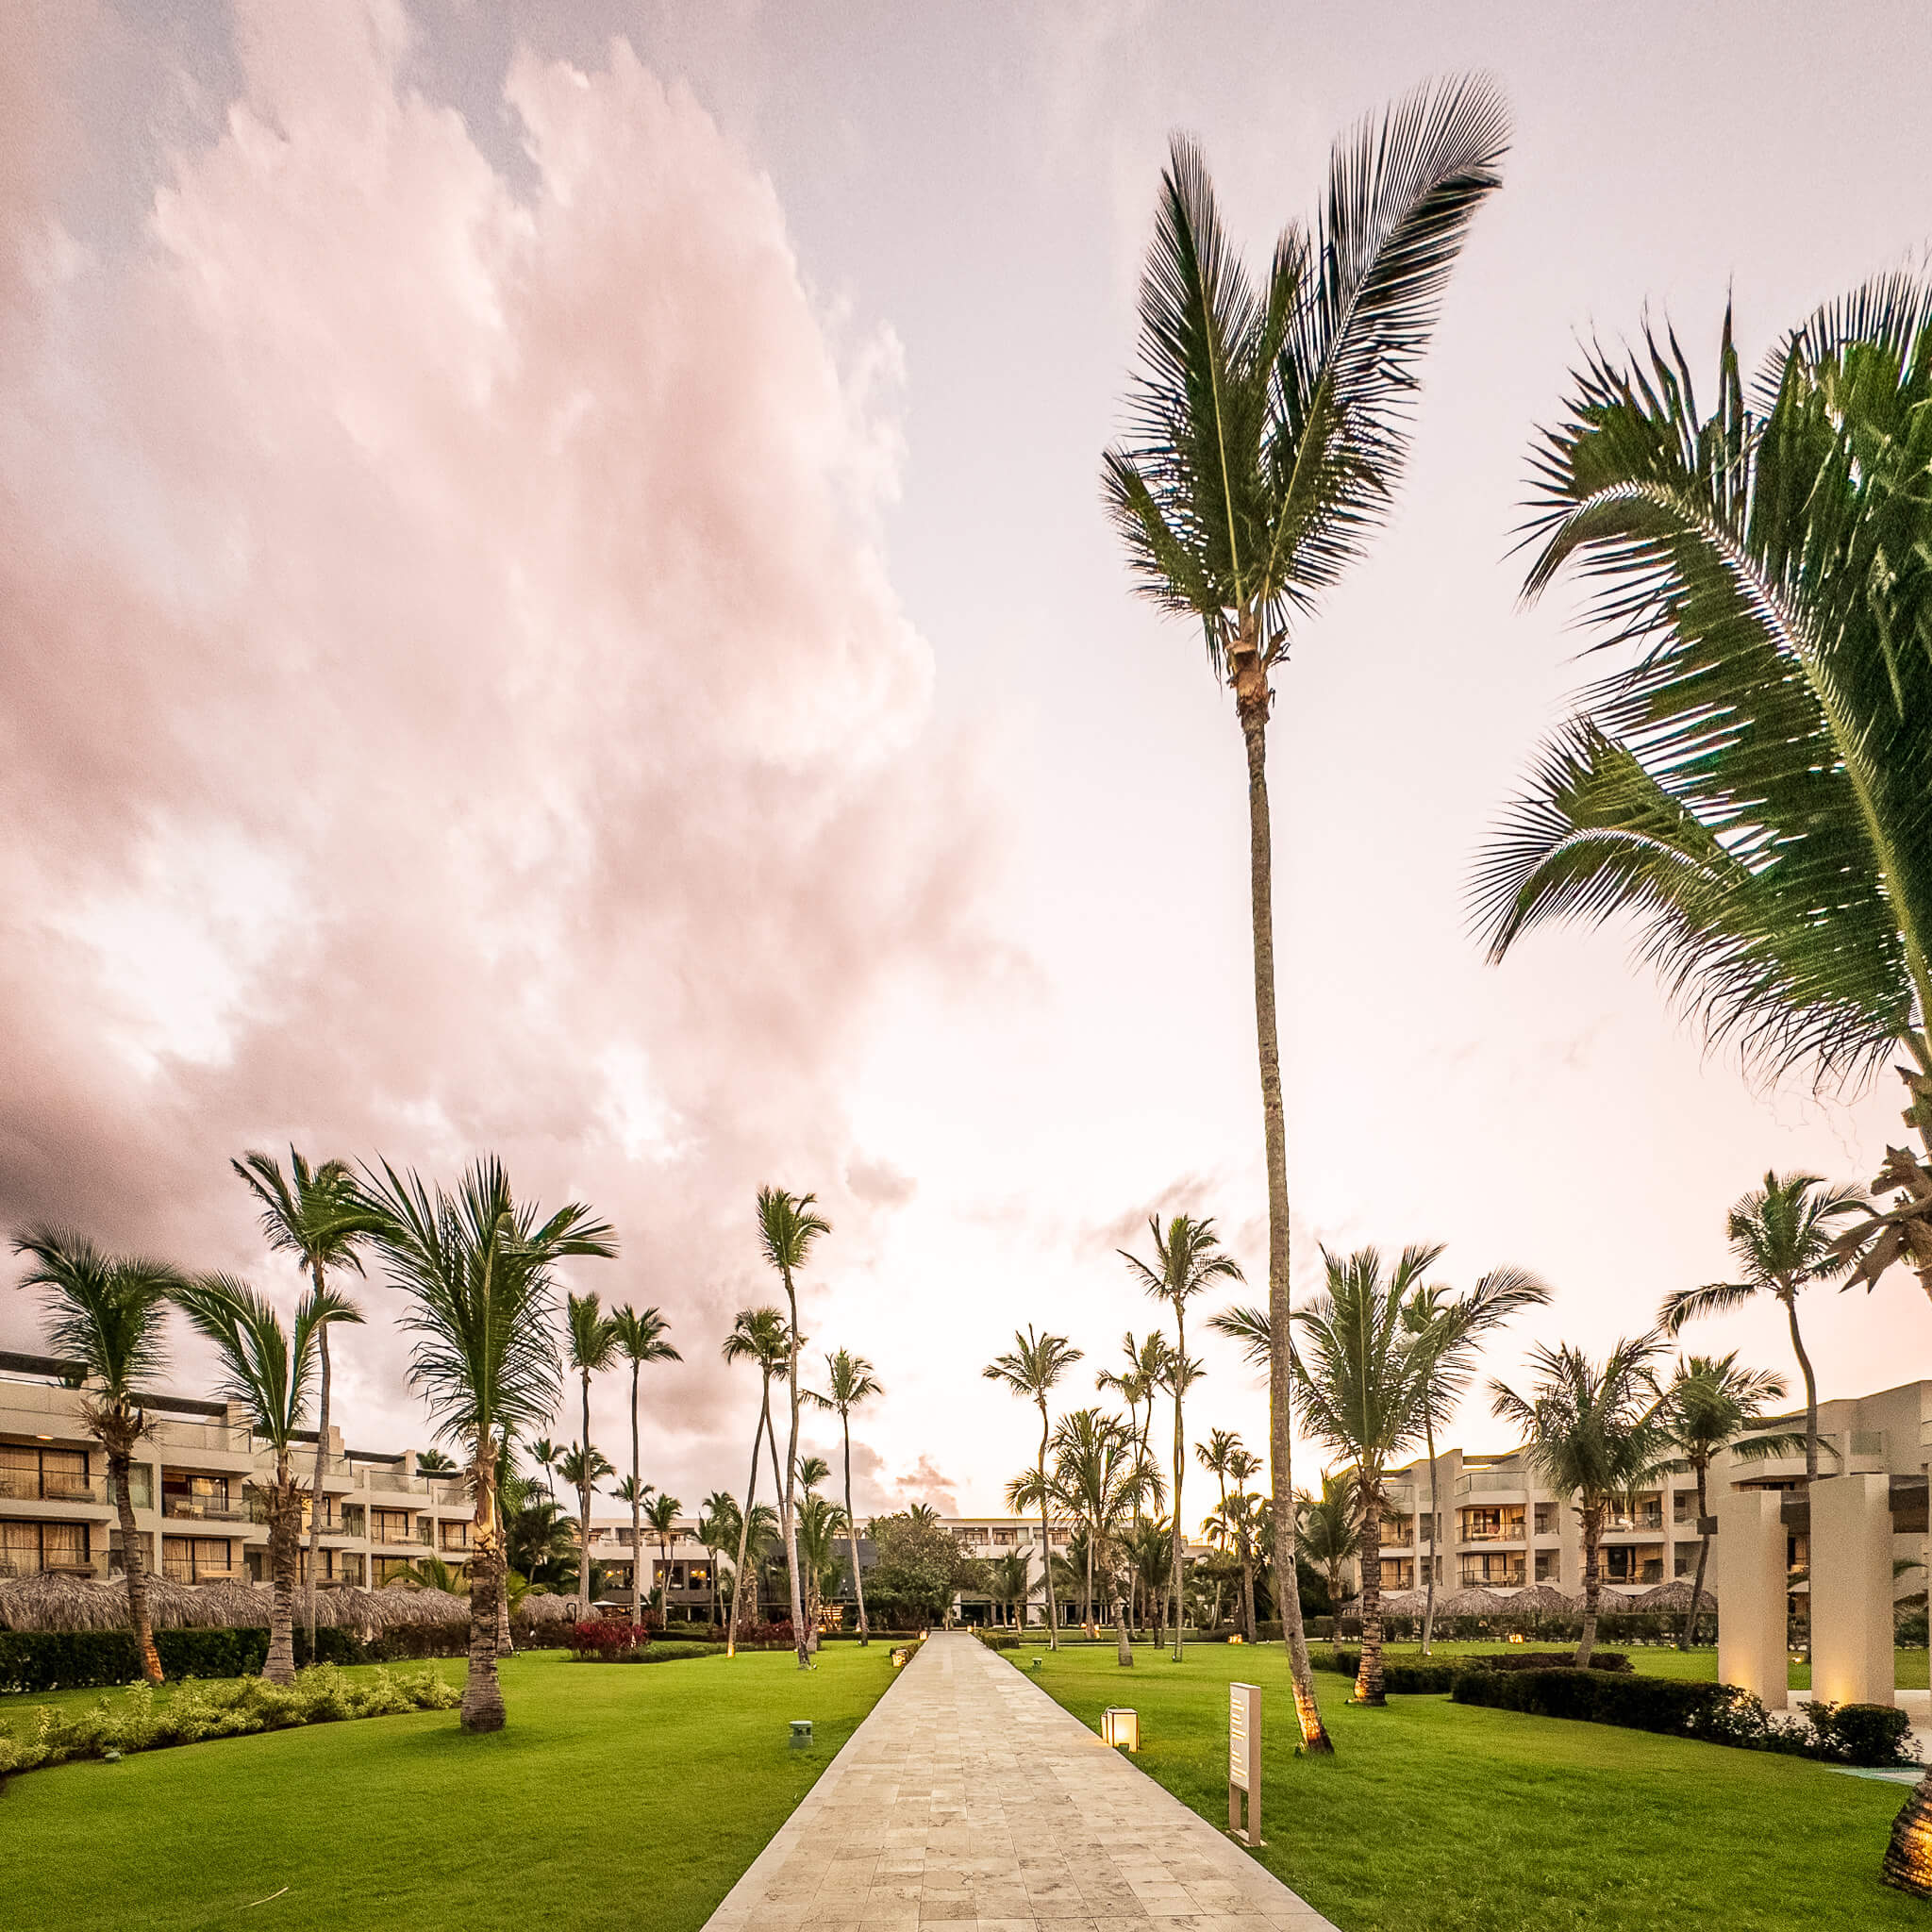 The impeccably maintained grounds of Excellence El Carmen in the Dominican Republic